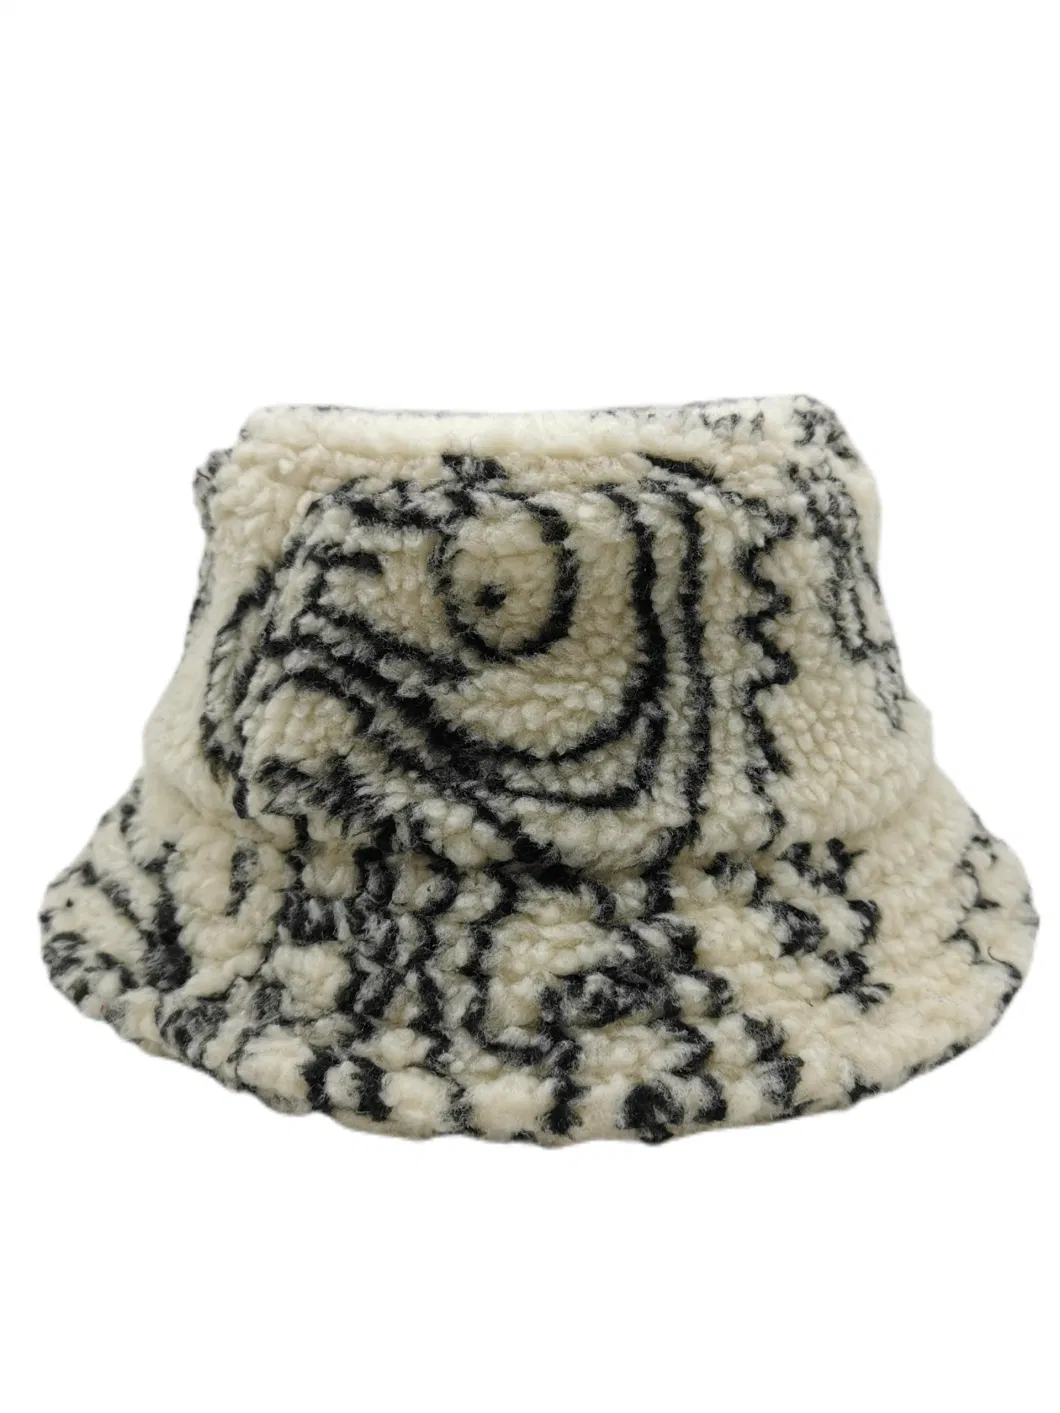 Wool Bucket Hat with Plaid Printing Winter Hat Outside Sun Protective Casual Cap for Outdoor Fashion Cap Customized Fishing Hat